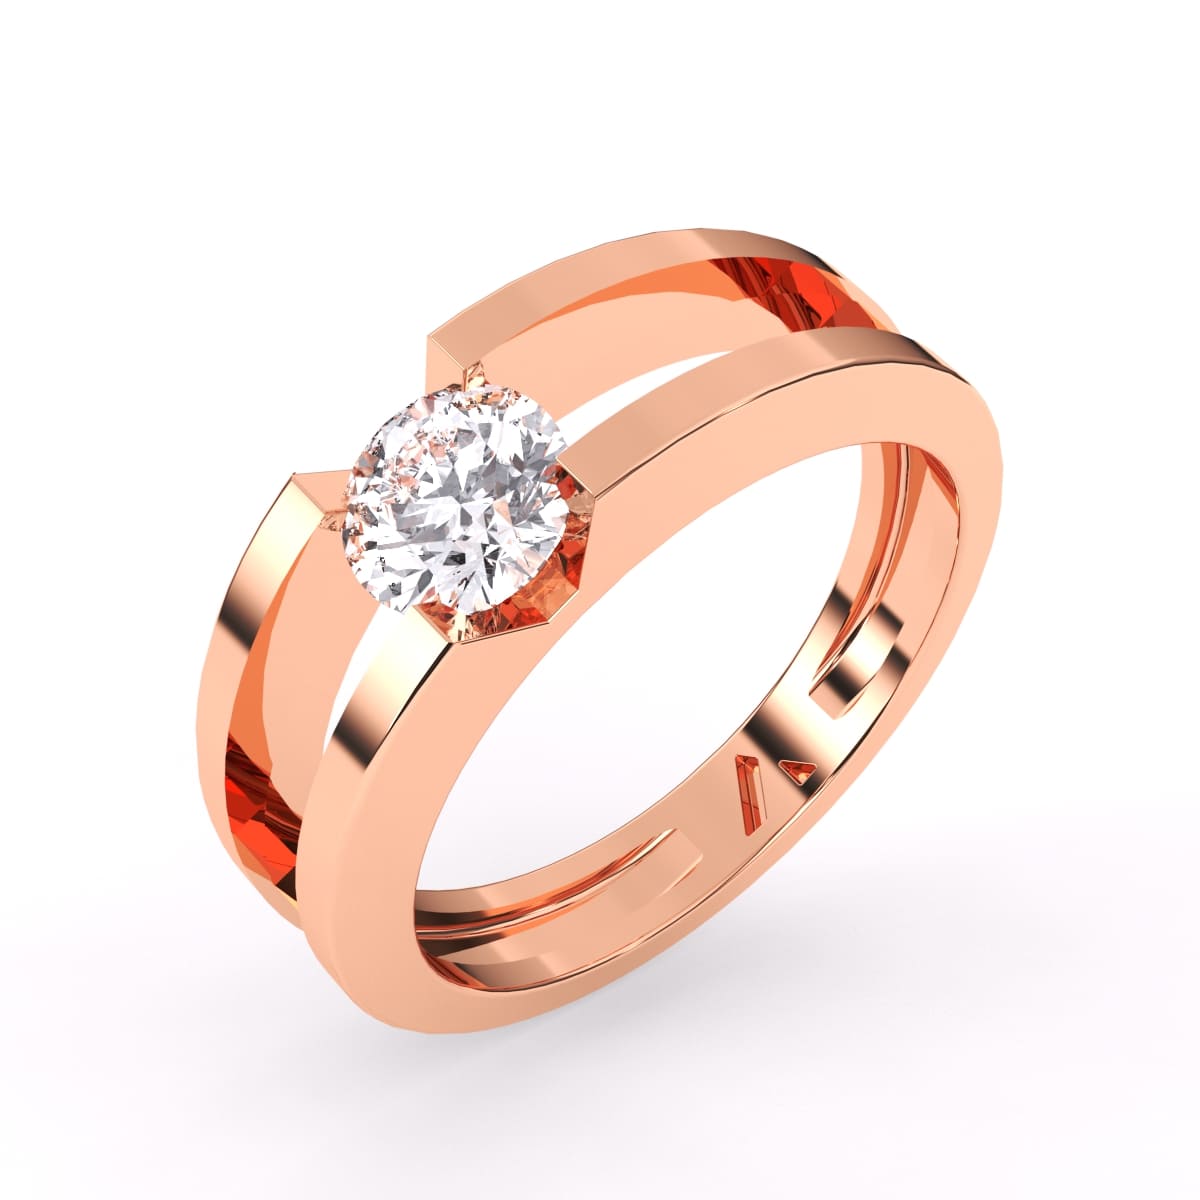 ZR561 Engagement Ring in 14k Gold with Diamonds – Zeghani Jewelry